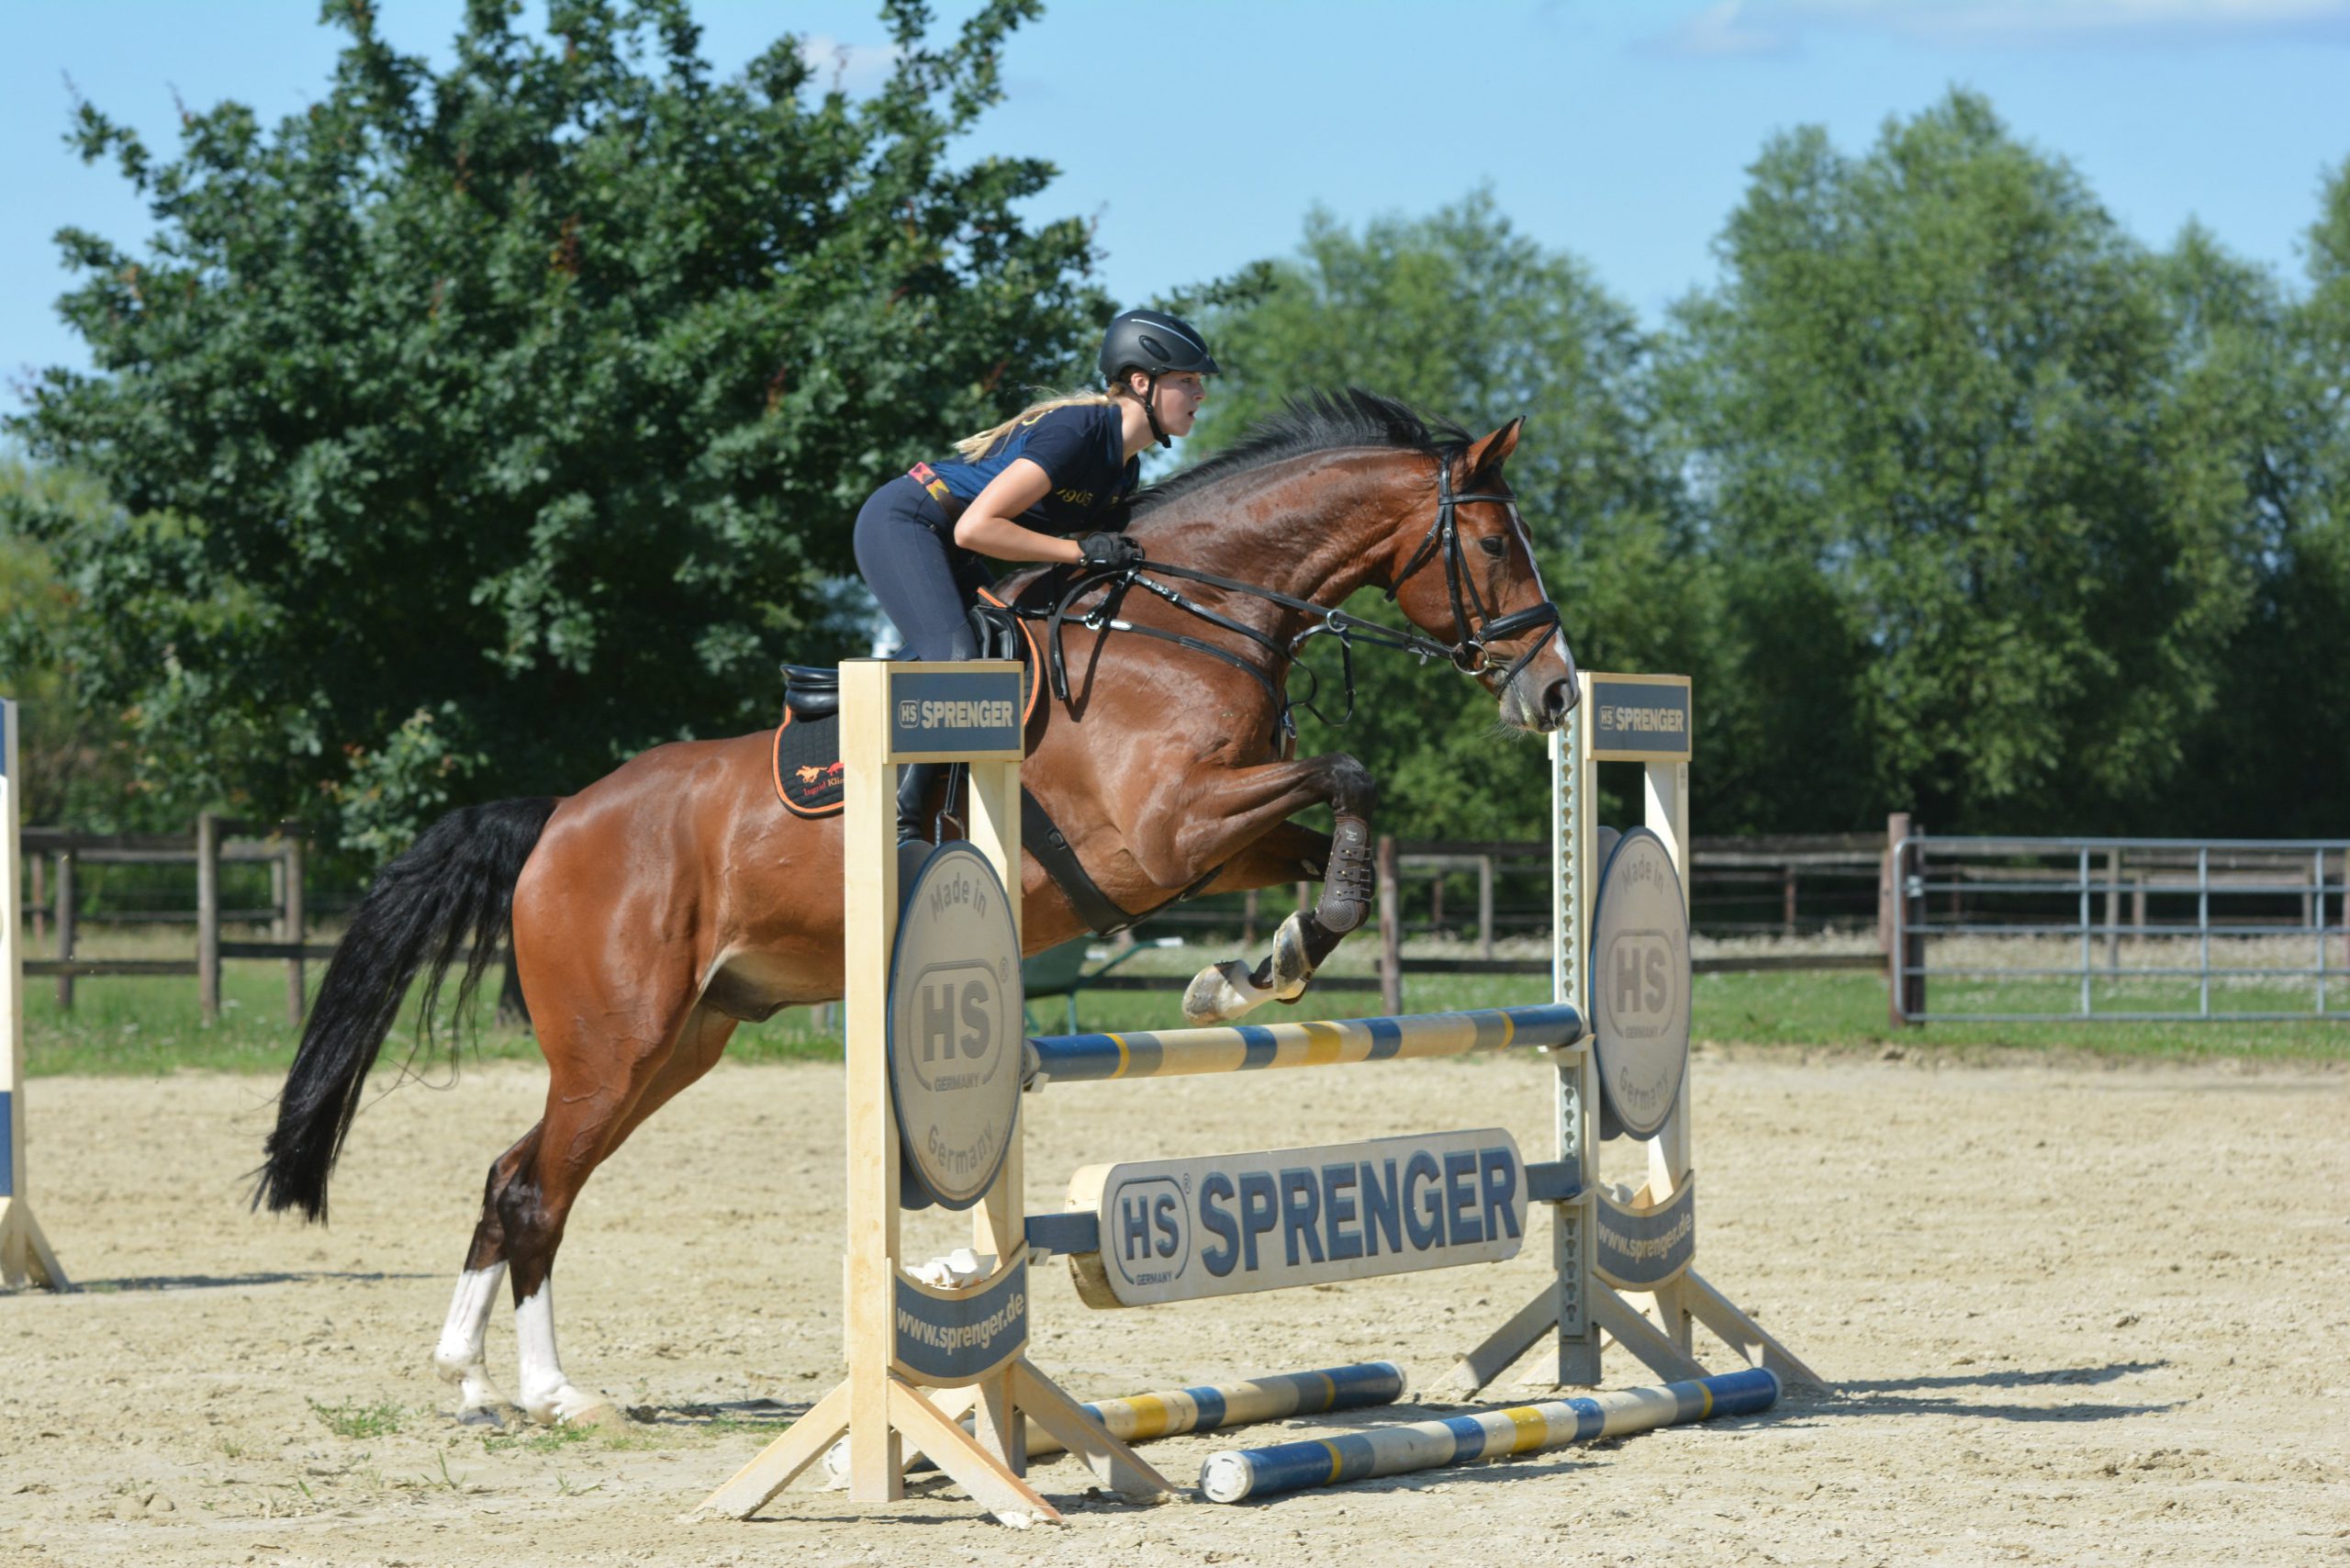 Ready for showjumping? Those jumping exercises are great for your horse!